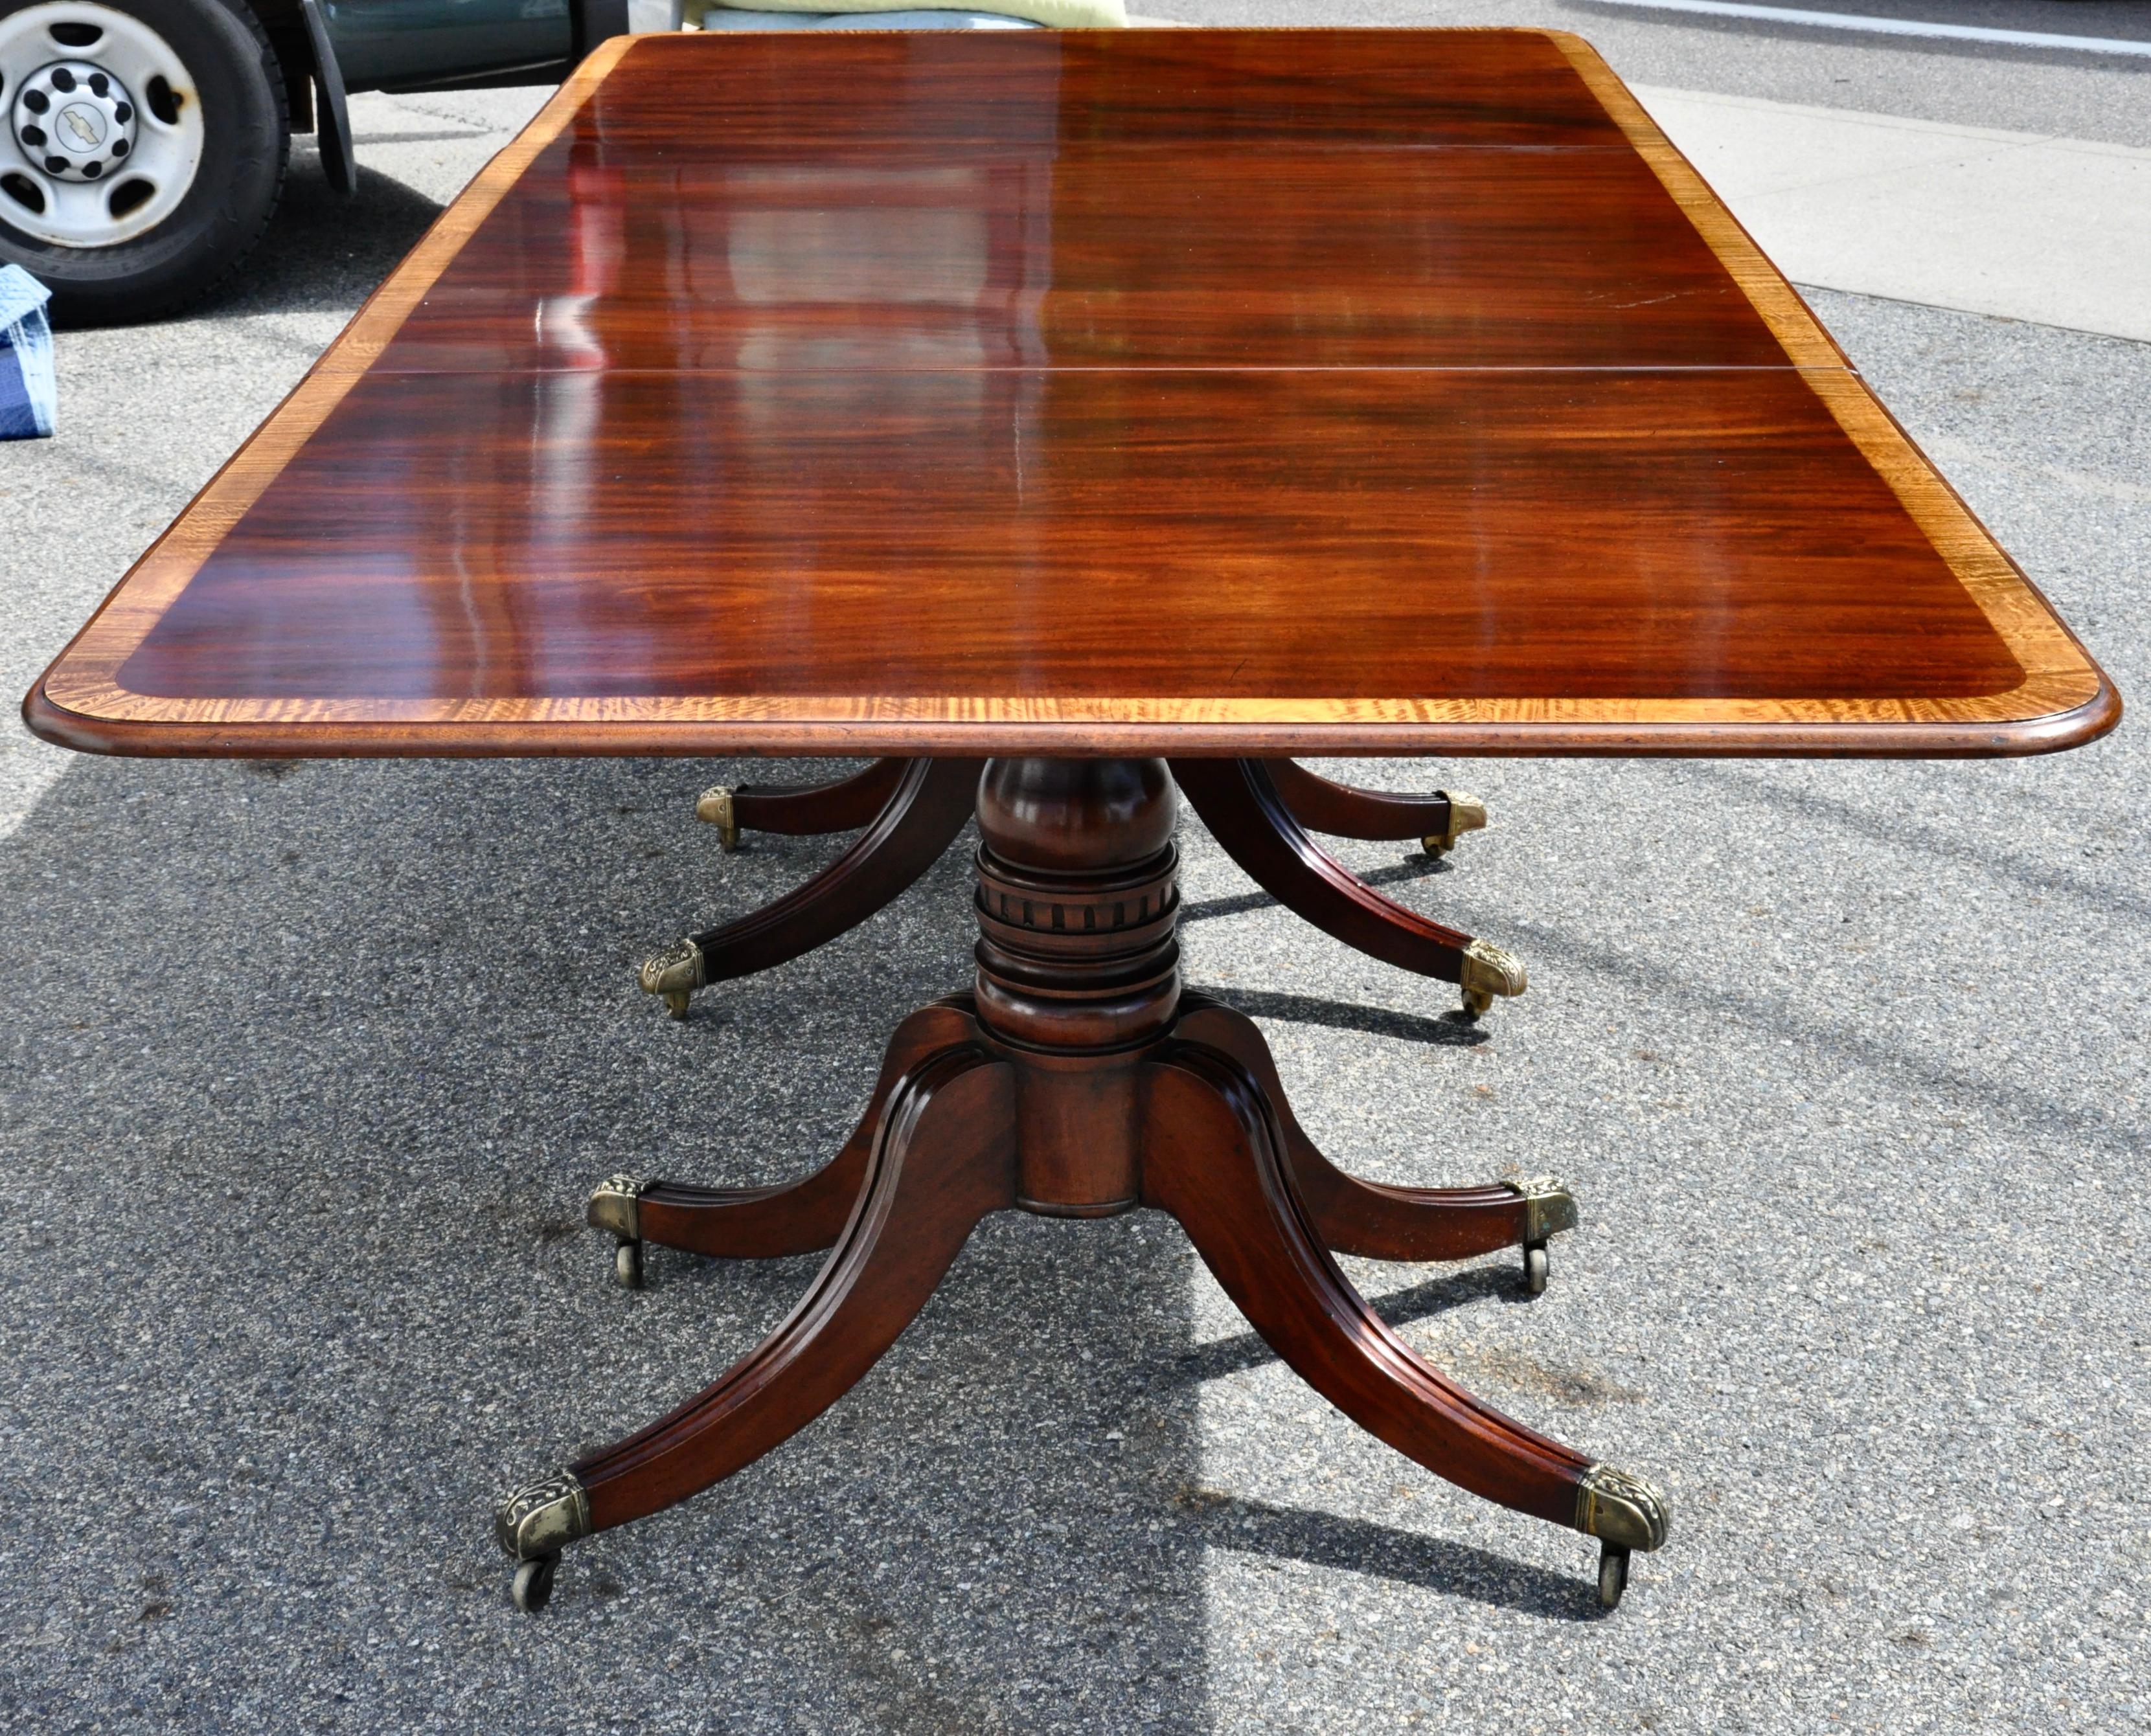 Period Regency or William IV mahogany three pedestal dining table with satinwood banding.

Three pedestal bases with spayed legs. Two original leaves. French polish. Beautiful wood figuring and color

Measures: Fully extended at 163